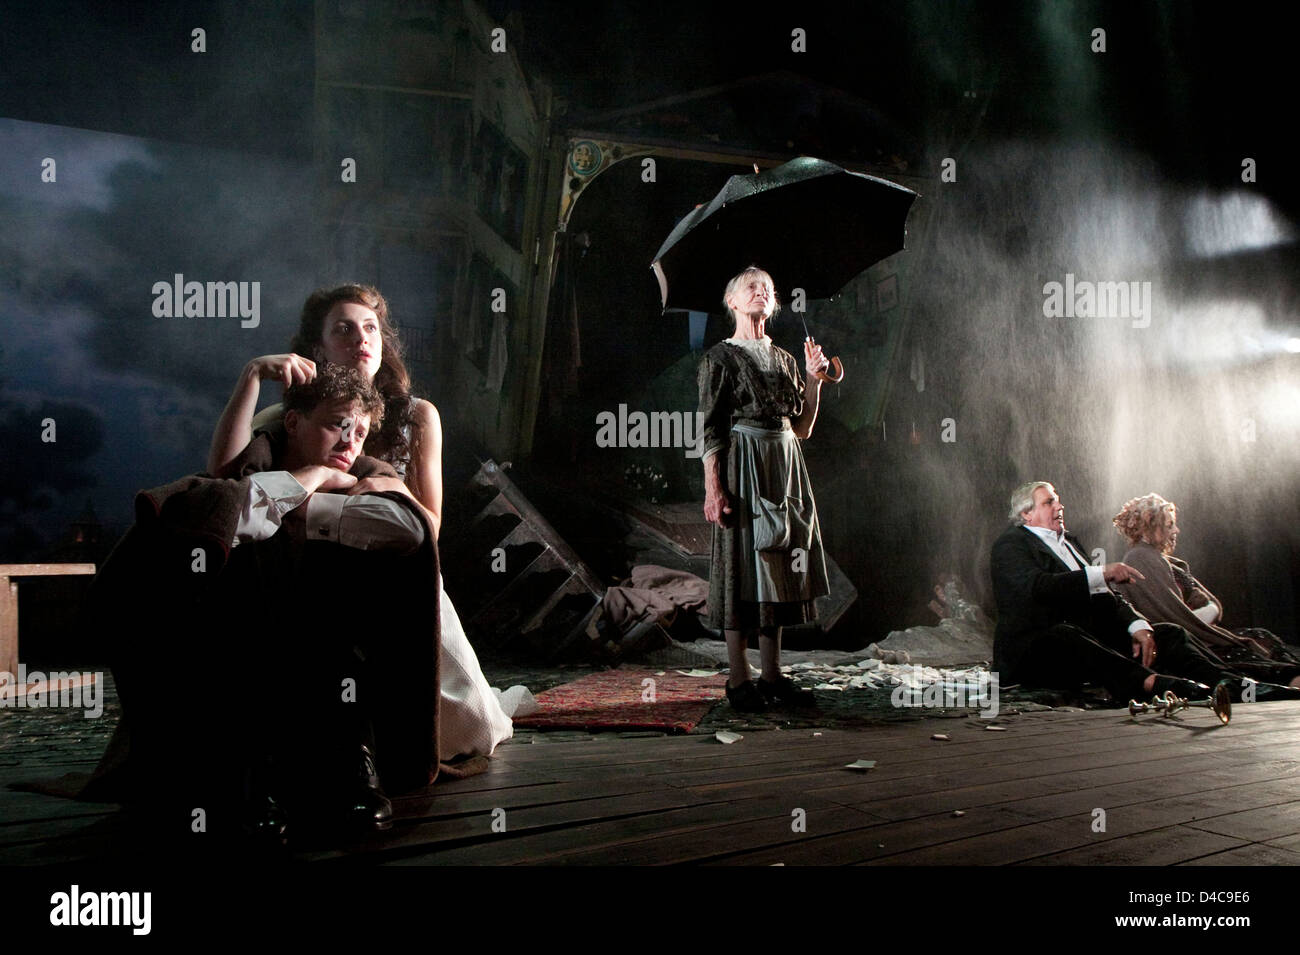 l-r: Robin Whiting (Eric Birling), Marianne Oldham (Sheila Birling), Diana Payne-Myers (Edna), David Roper (Arthur Birling), Sandra Duncan (Sybil Birling) in AN INSPECTOR CALLS by J B Priestley at the Novello Theatre, London WC2 25/09/2009 a National Theatre production  design: Ian MacNeil   lighting: Rick Fisher   director: Stephen Daldry Stock Photo